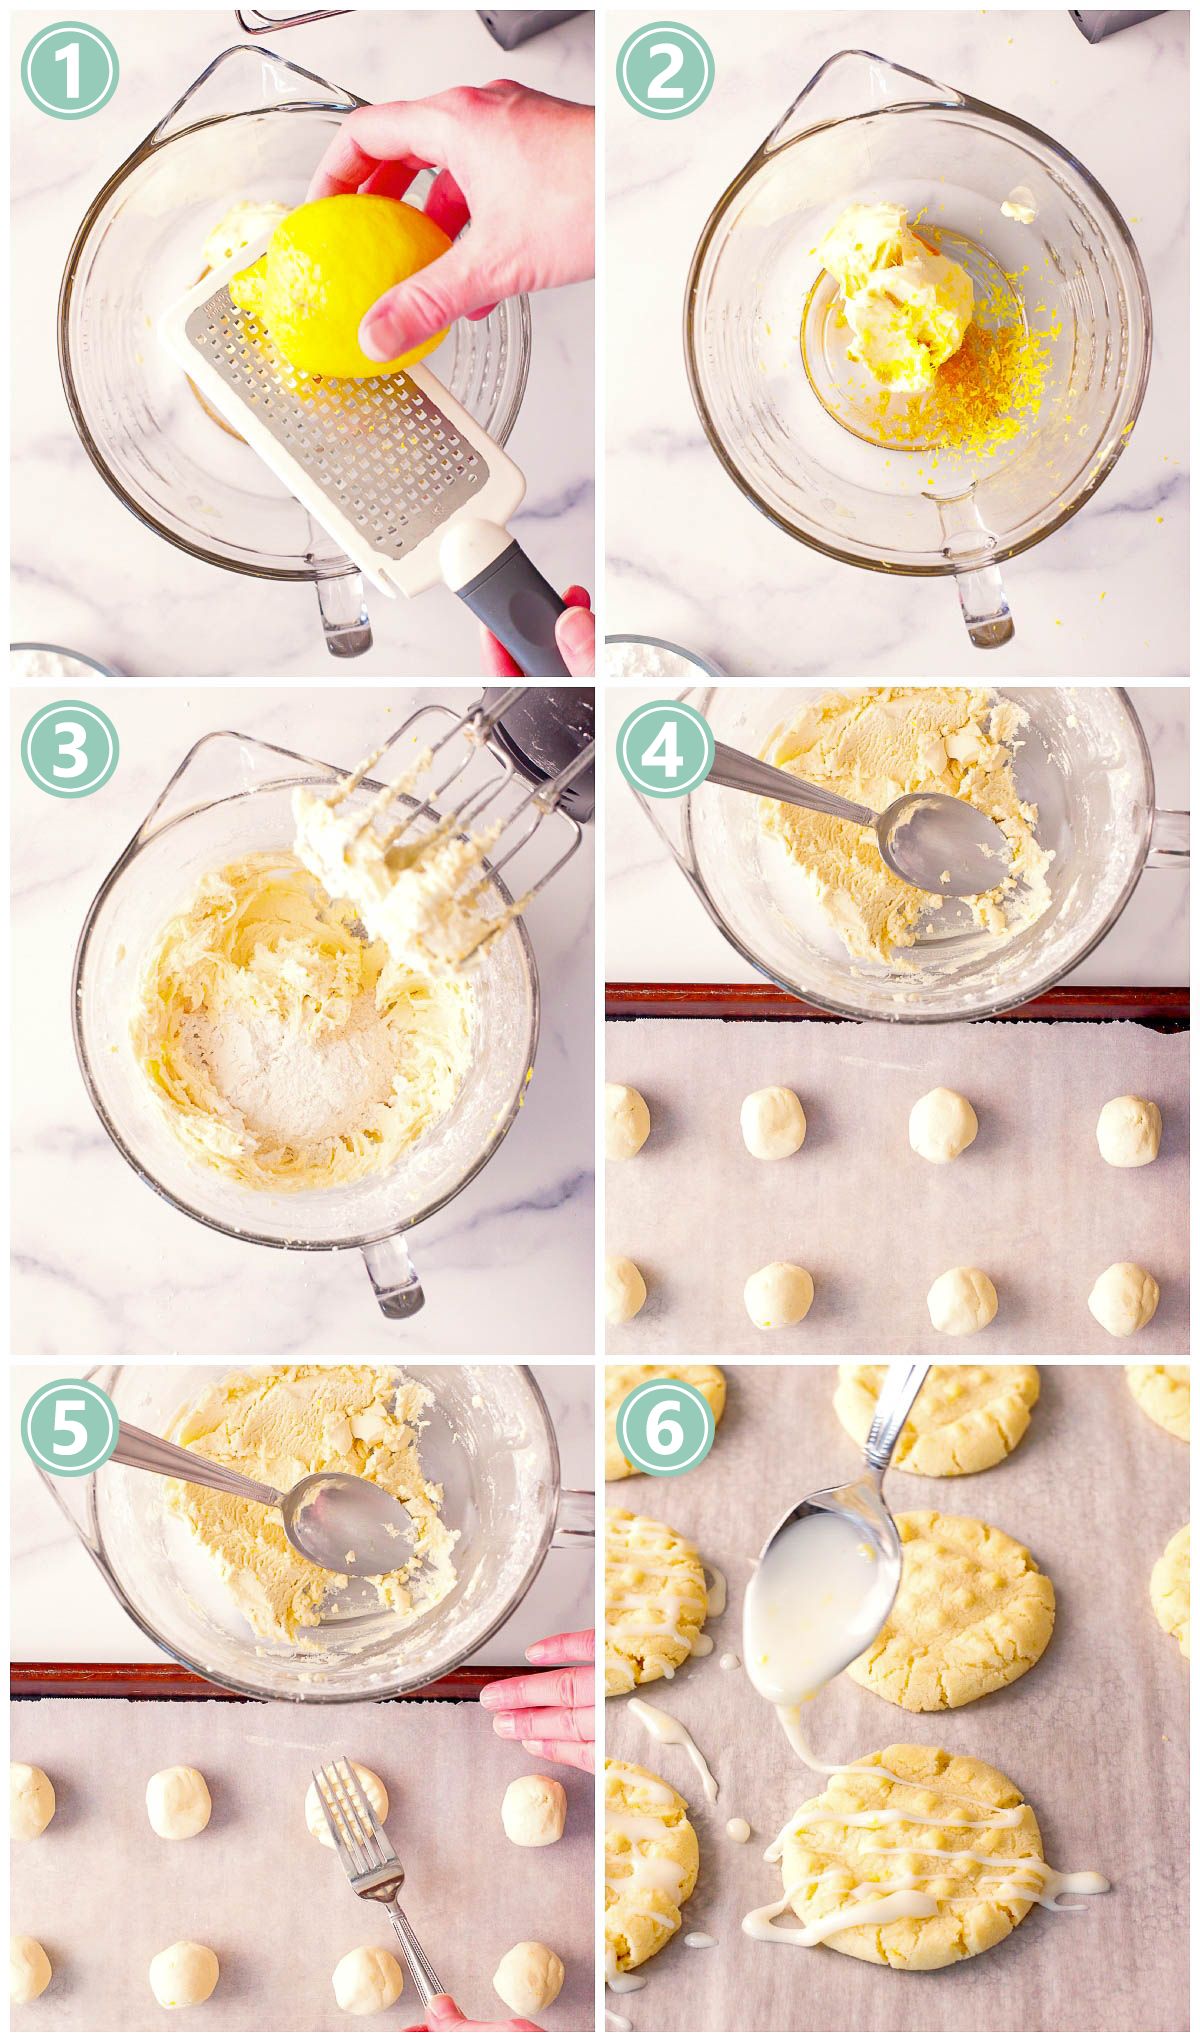 Step-by-step photos in a collage showing steps for making lemon shortbread cookies.